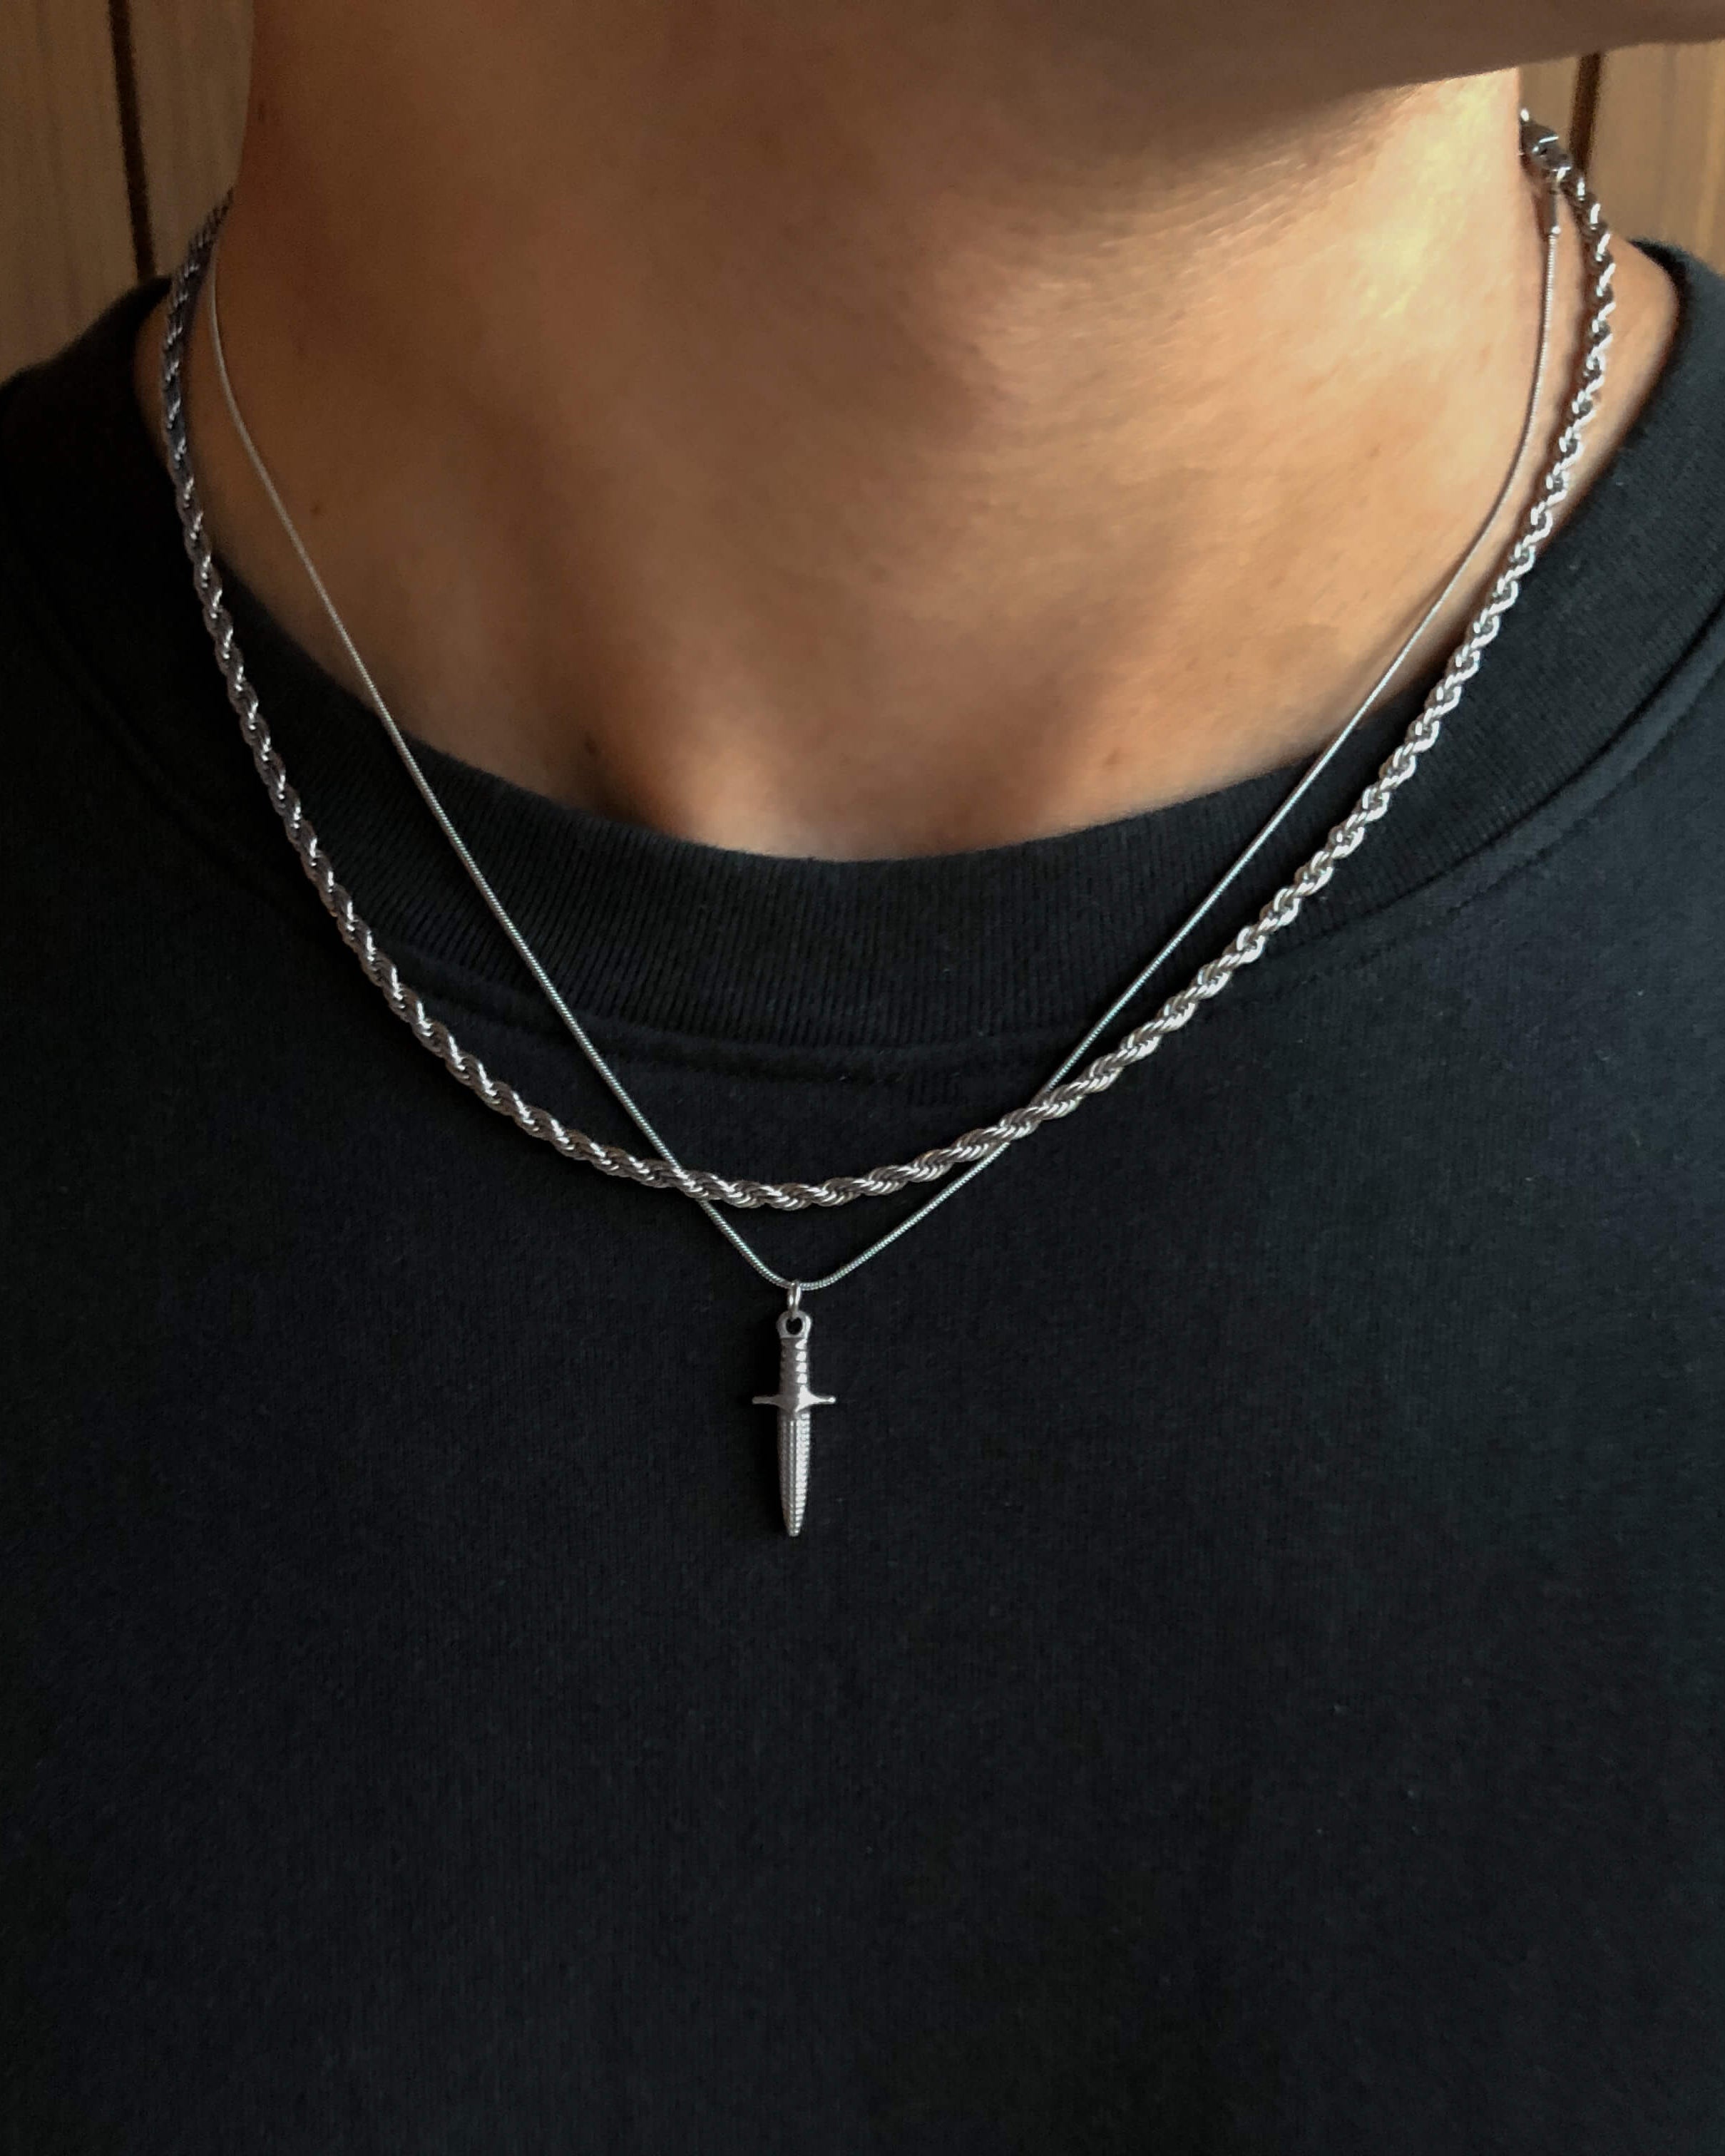 dagger-knife-sword-silver-necklace-chain-stainless-steel